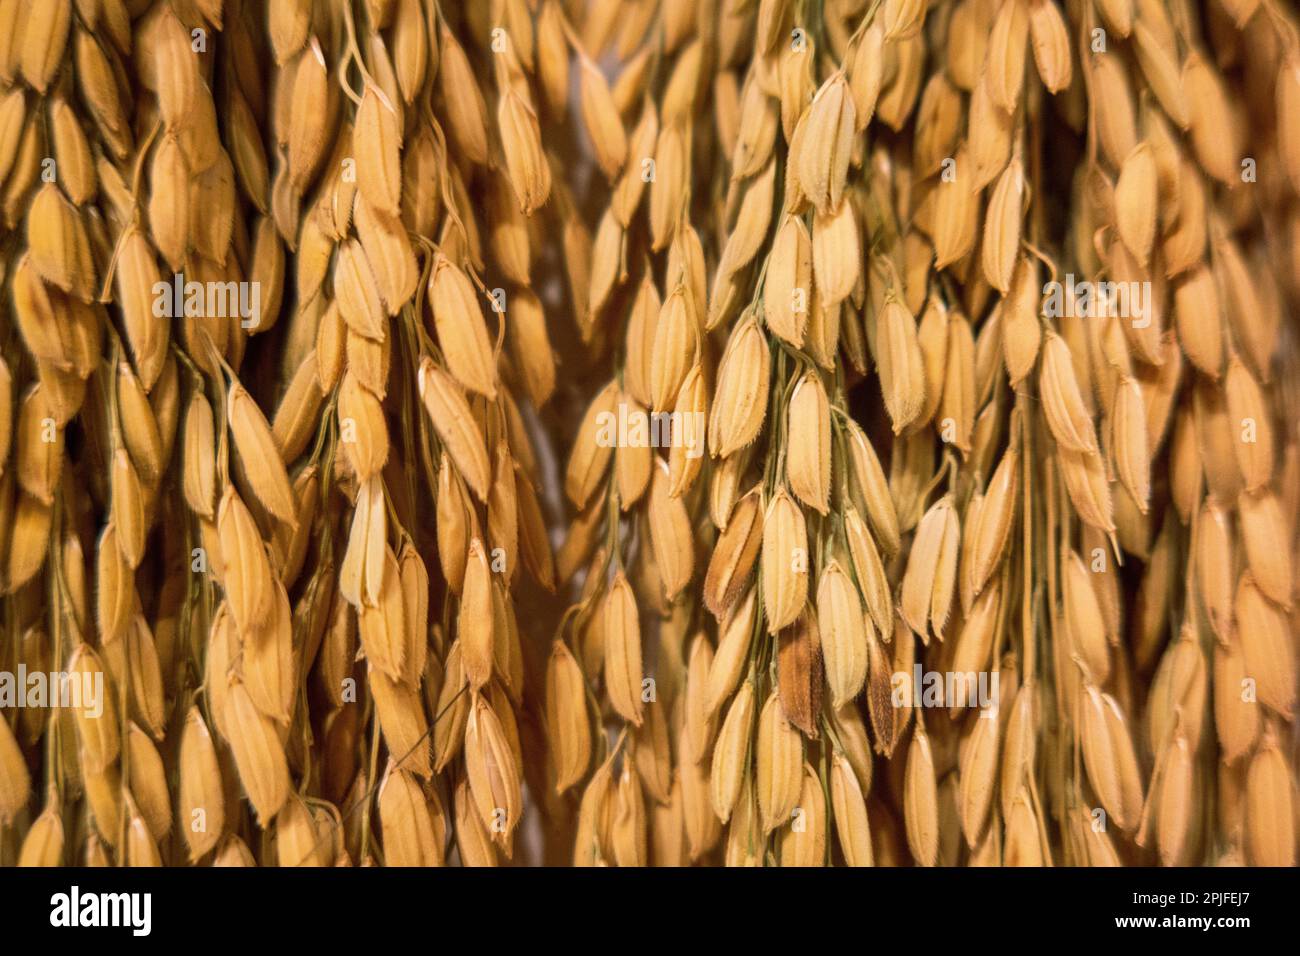 A Bunch of rice seeds on the plant with the husk Stock Photo